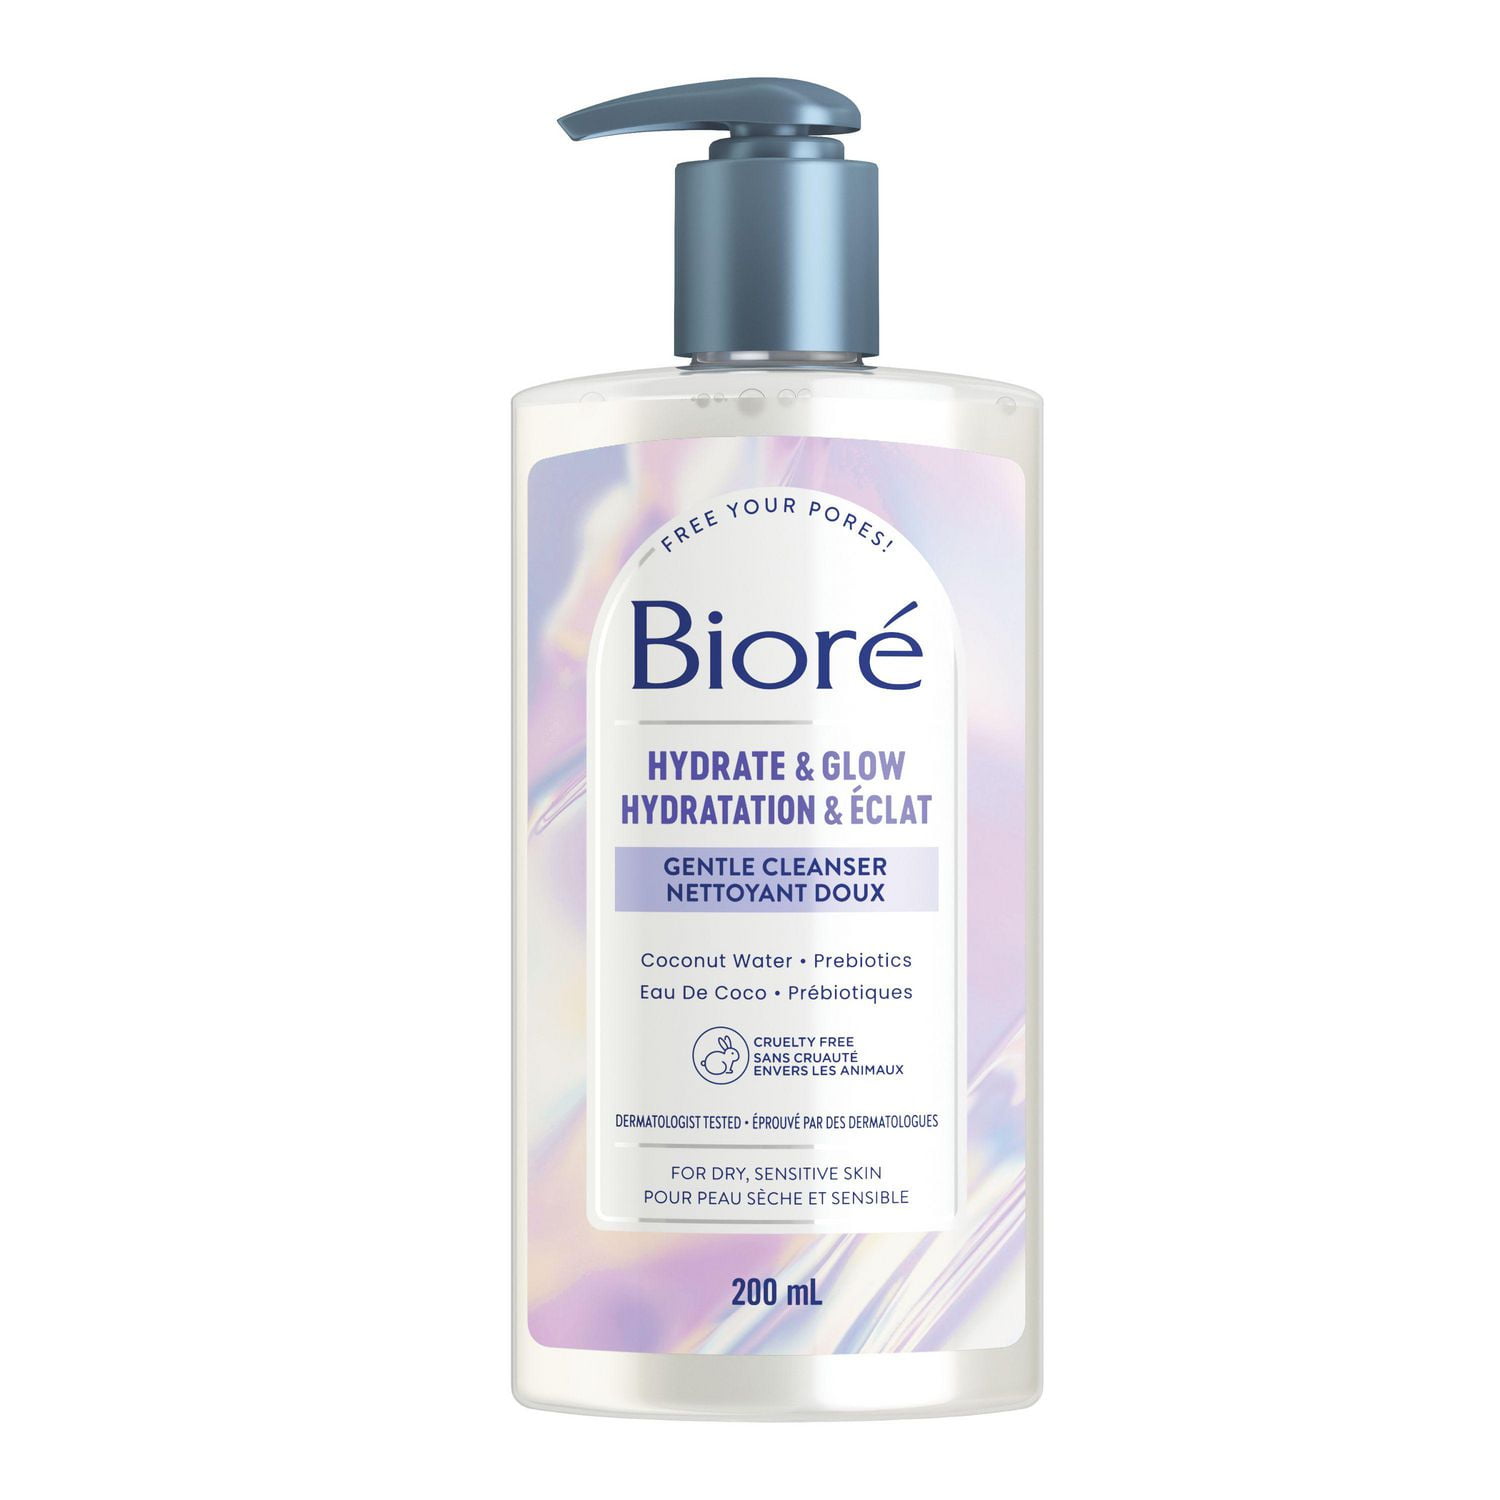 Bioré Hydrate & Glow Gentle Cleanser, Face Wash for Dry and Sensitive Skin,  200mL, Dermatologist Tested